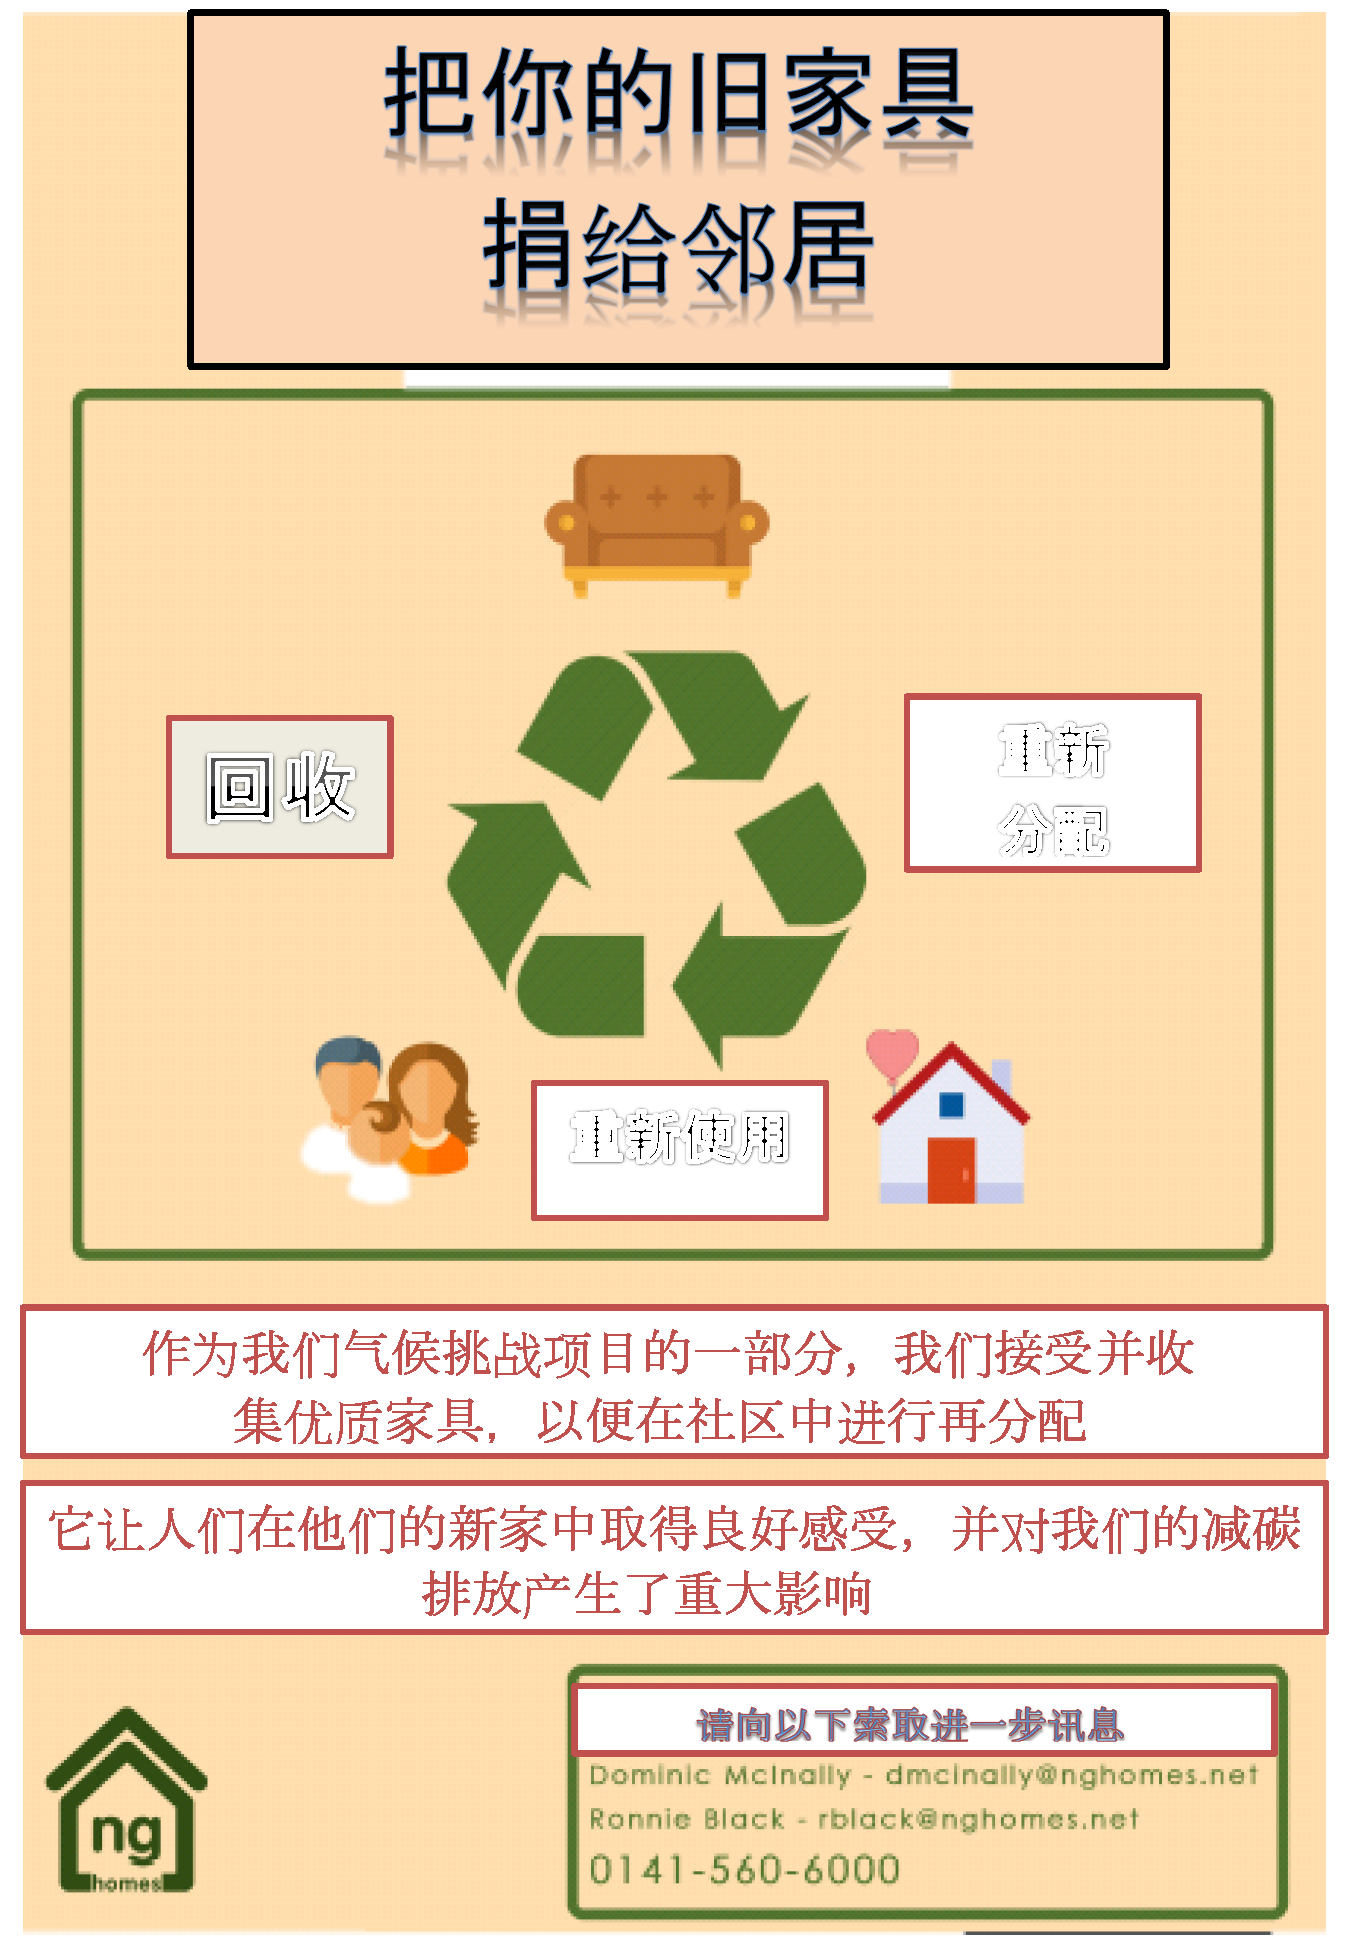 Furniture Redistribution Poster in Chinese